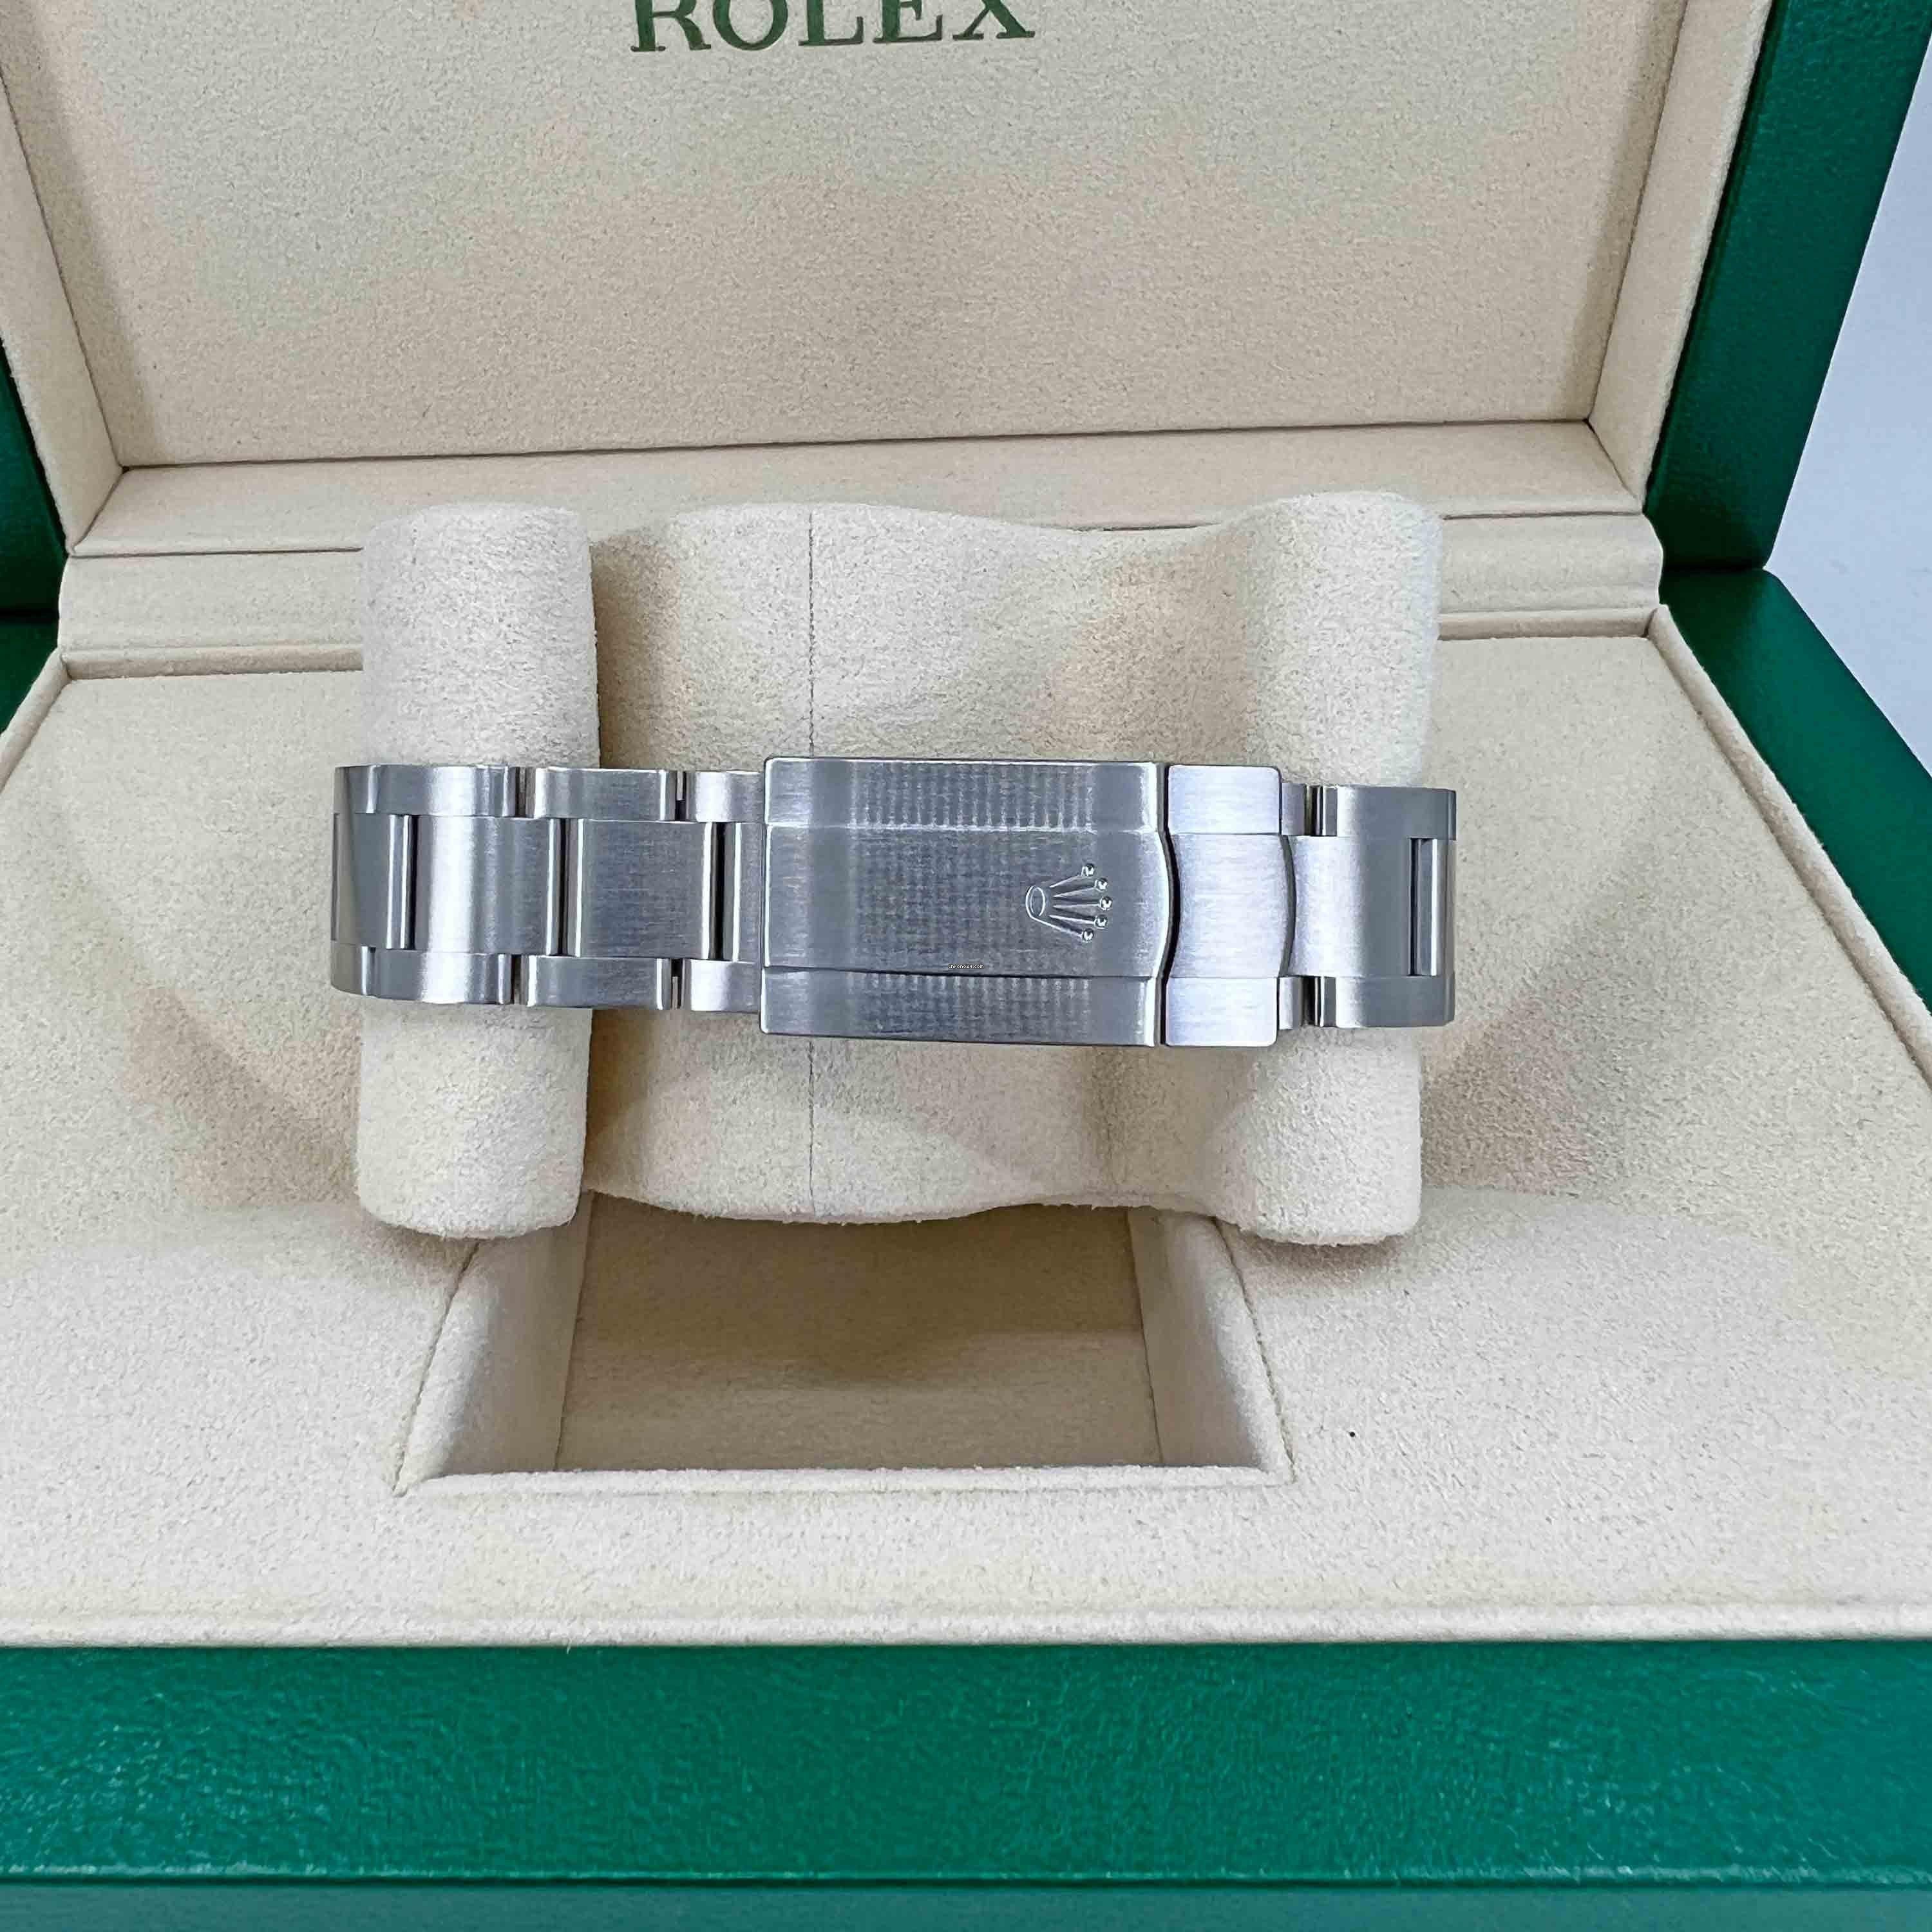 Rolex Air-King, Stainless Steel, Unworn Watch, 2021, Discontinued For Sale 5